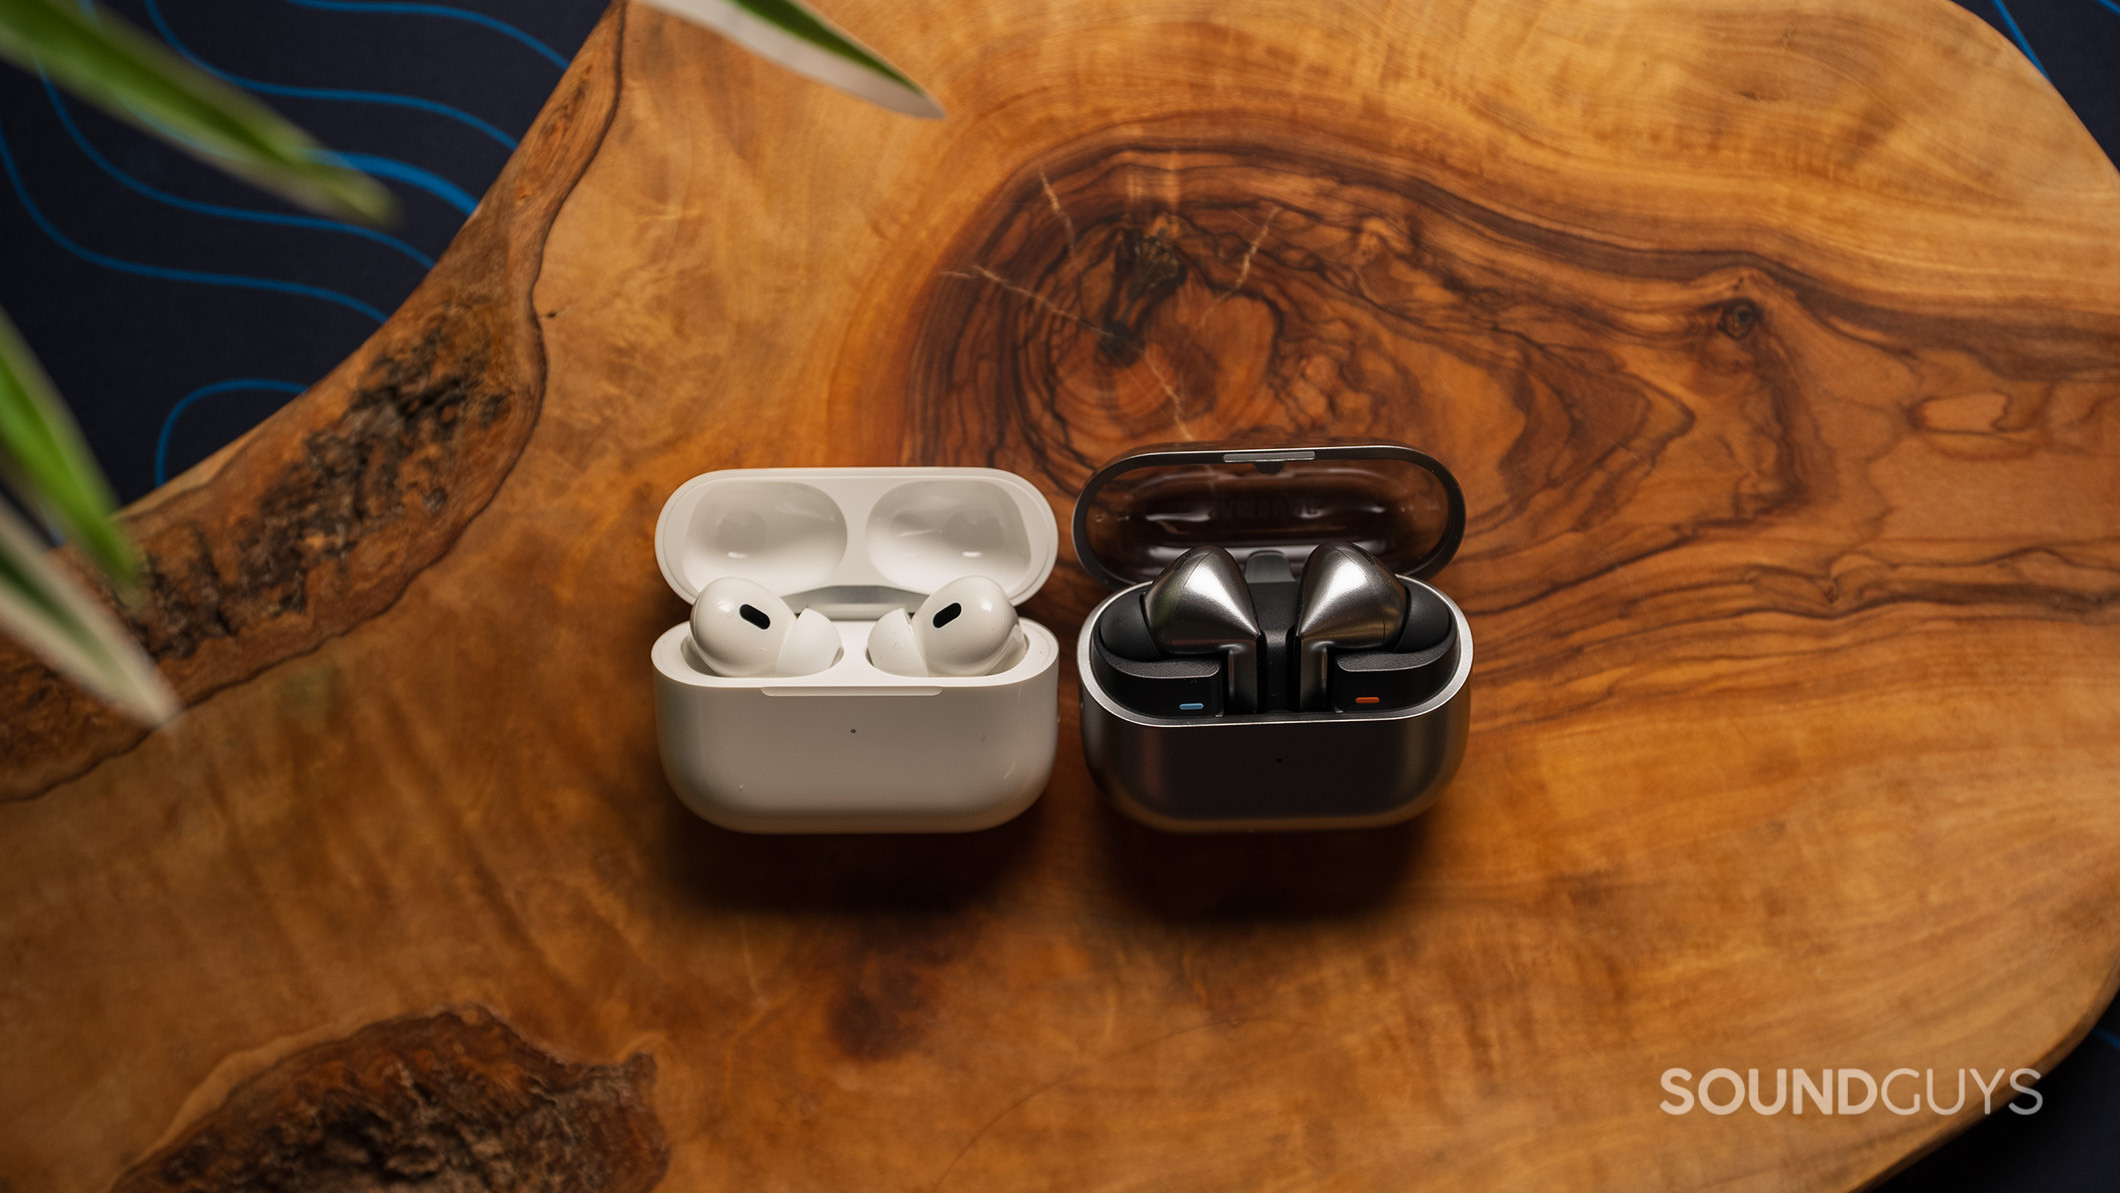 The Samsung Galaxy Buds3 Pro next to the Apple AirPods Pro (2nd generation)